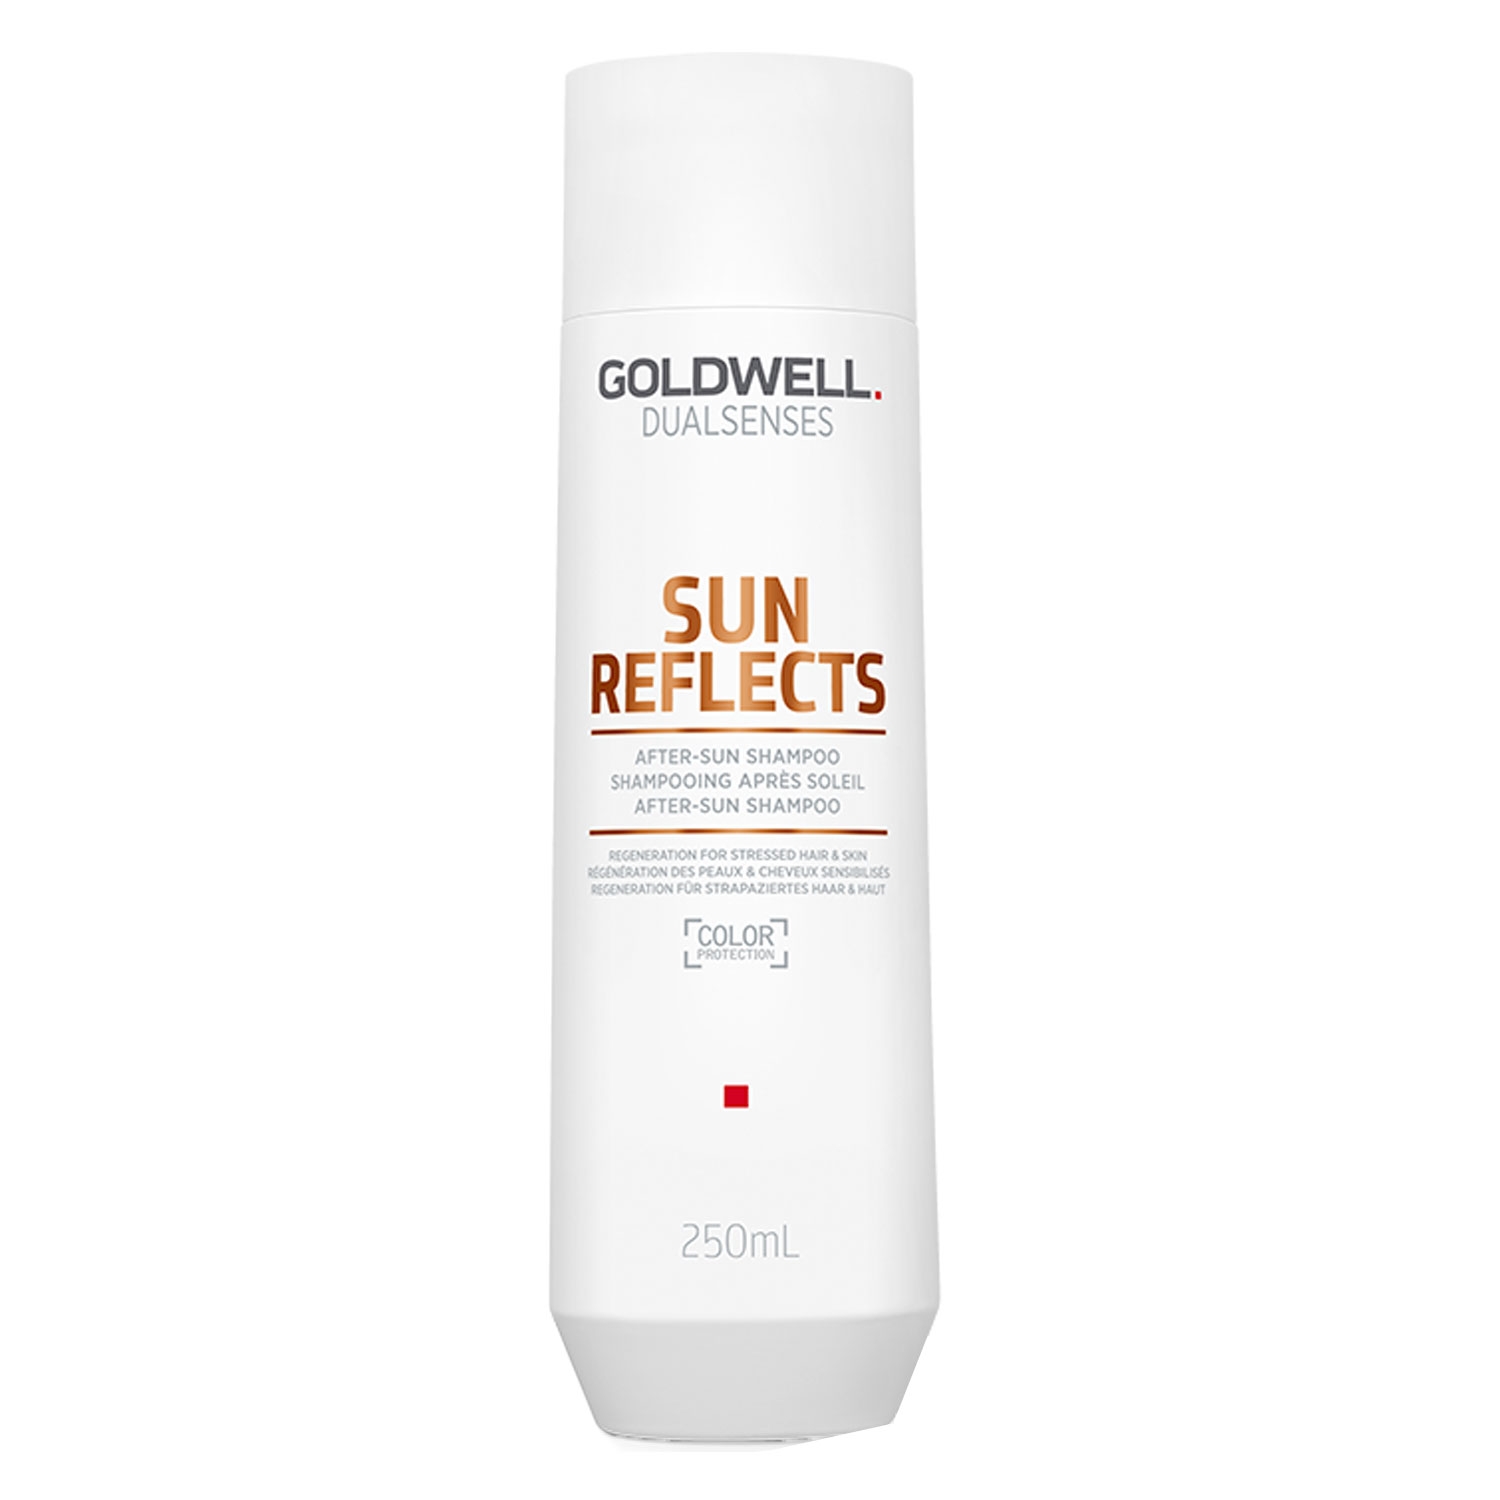 Product image from Dualsenses Sun Reflects - After-Sun Shampoo